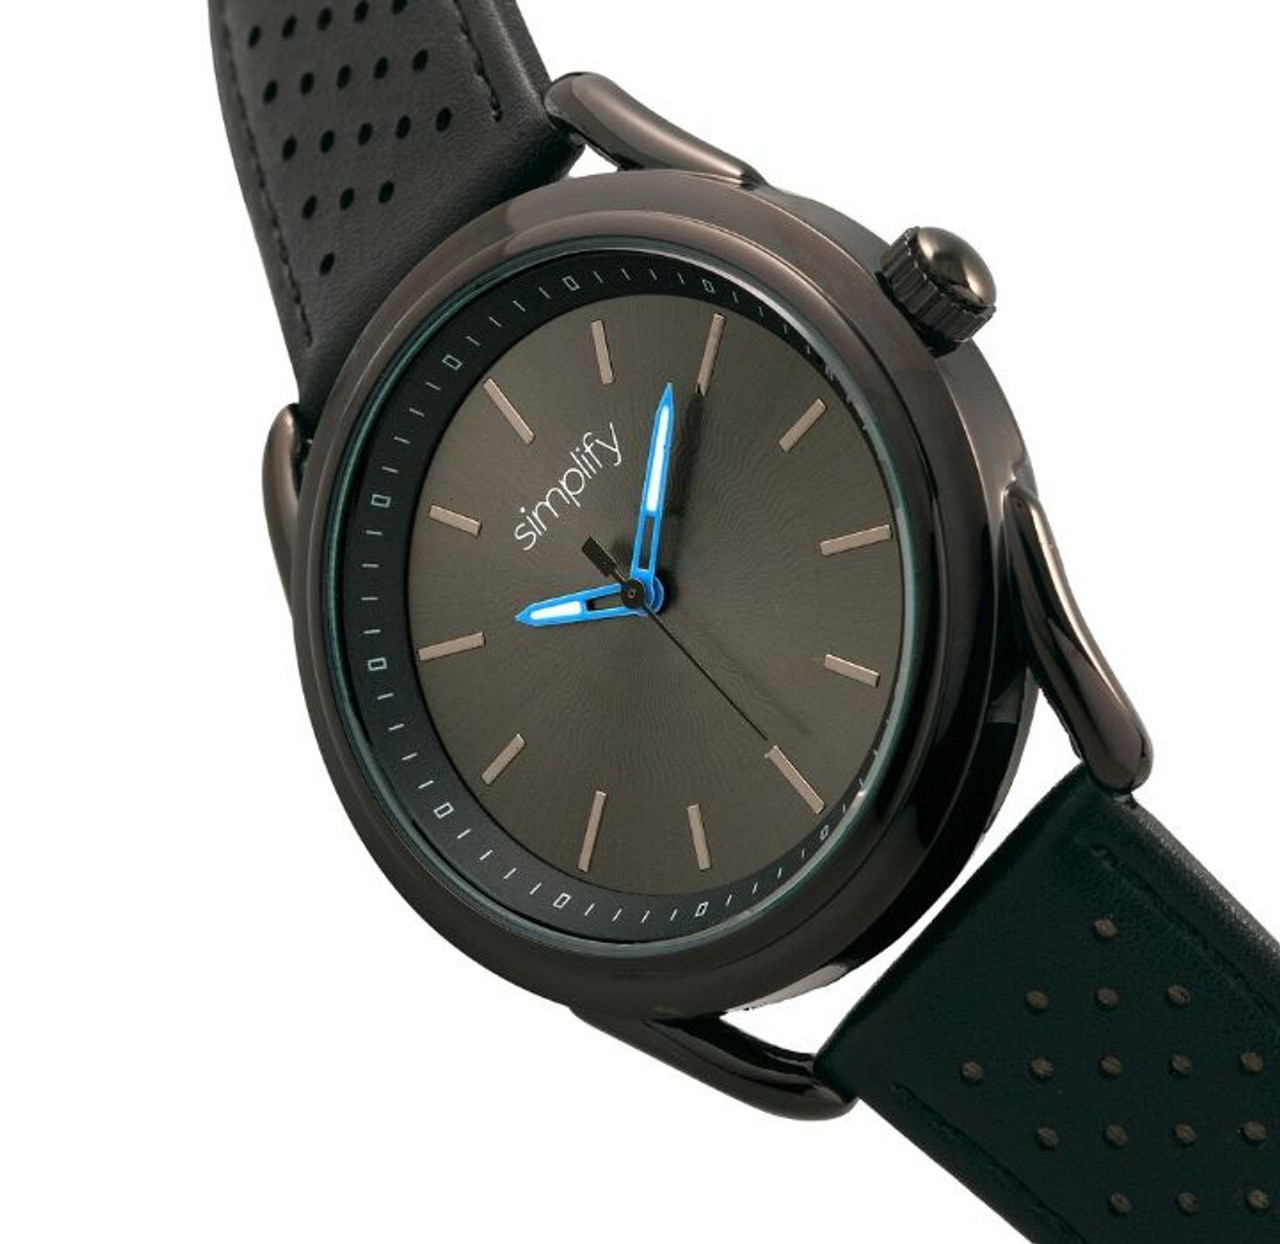 Simplify The 5900 Leather-Band Unisex Watch product image